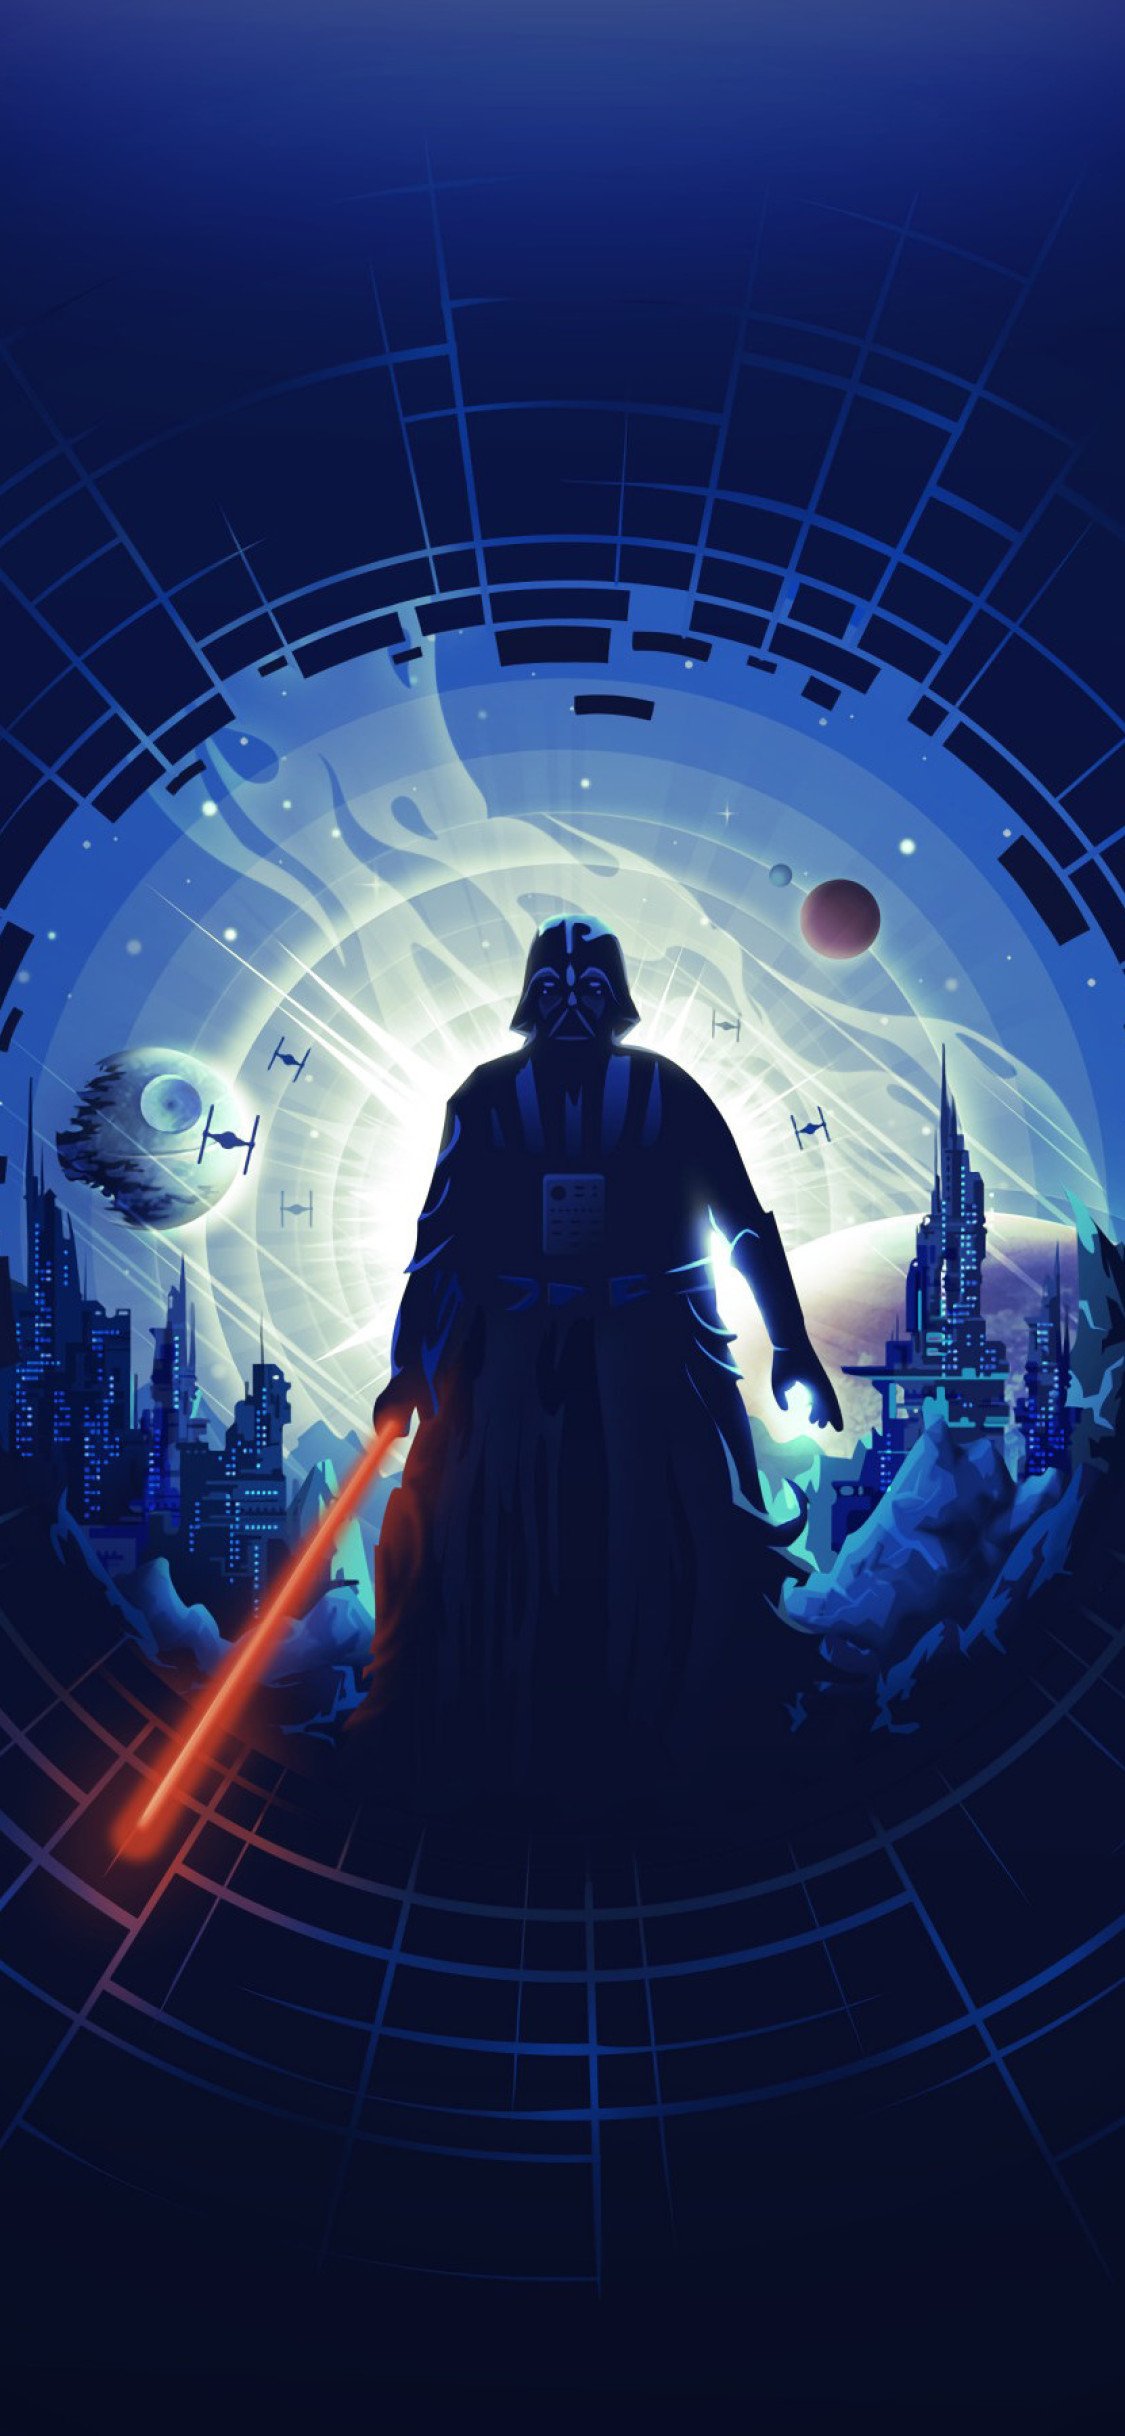 75 Star Wars Wallpaper Backgrounds For iPhone To Download Free 